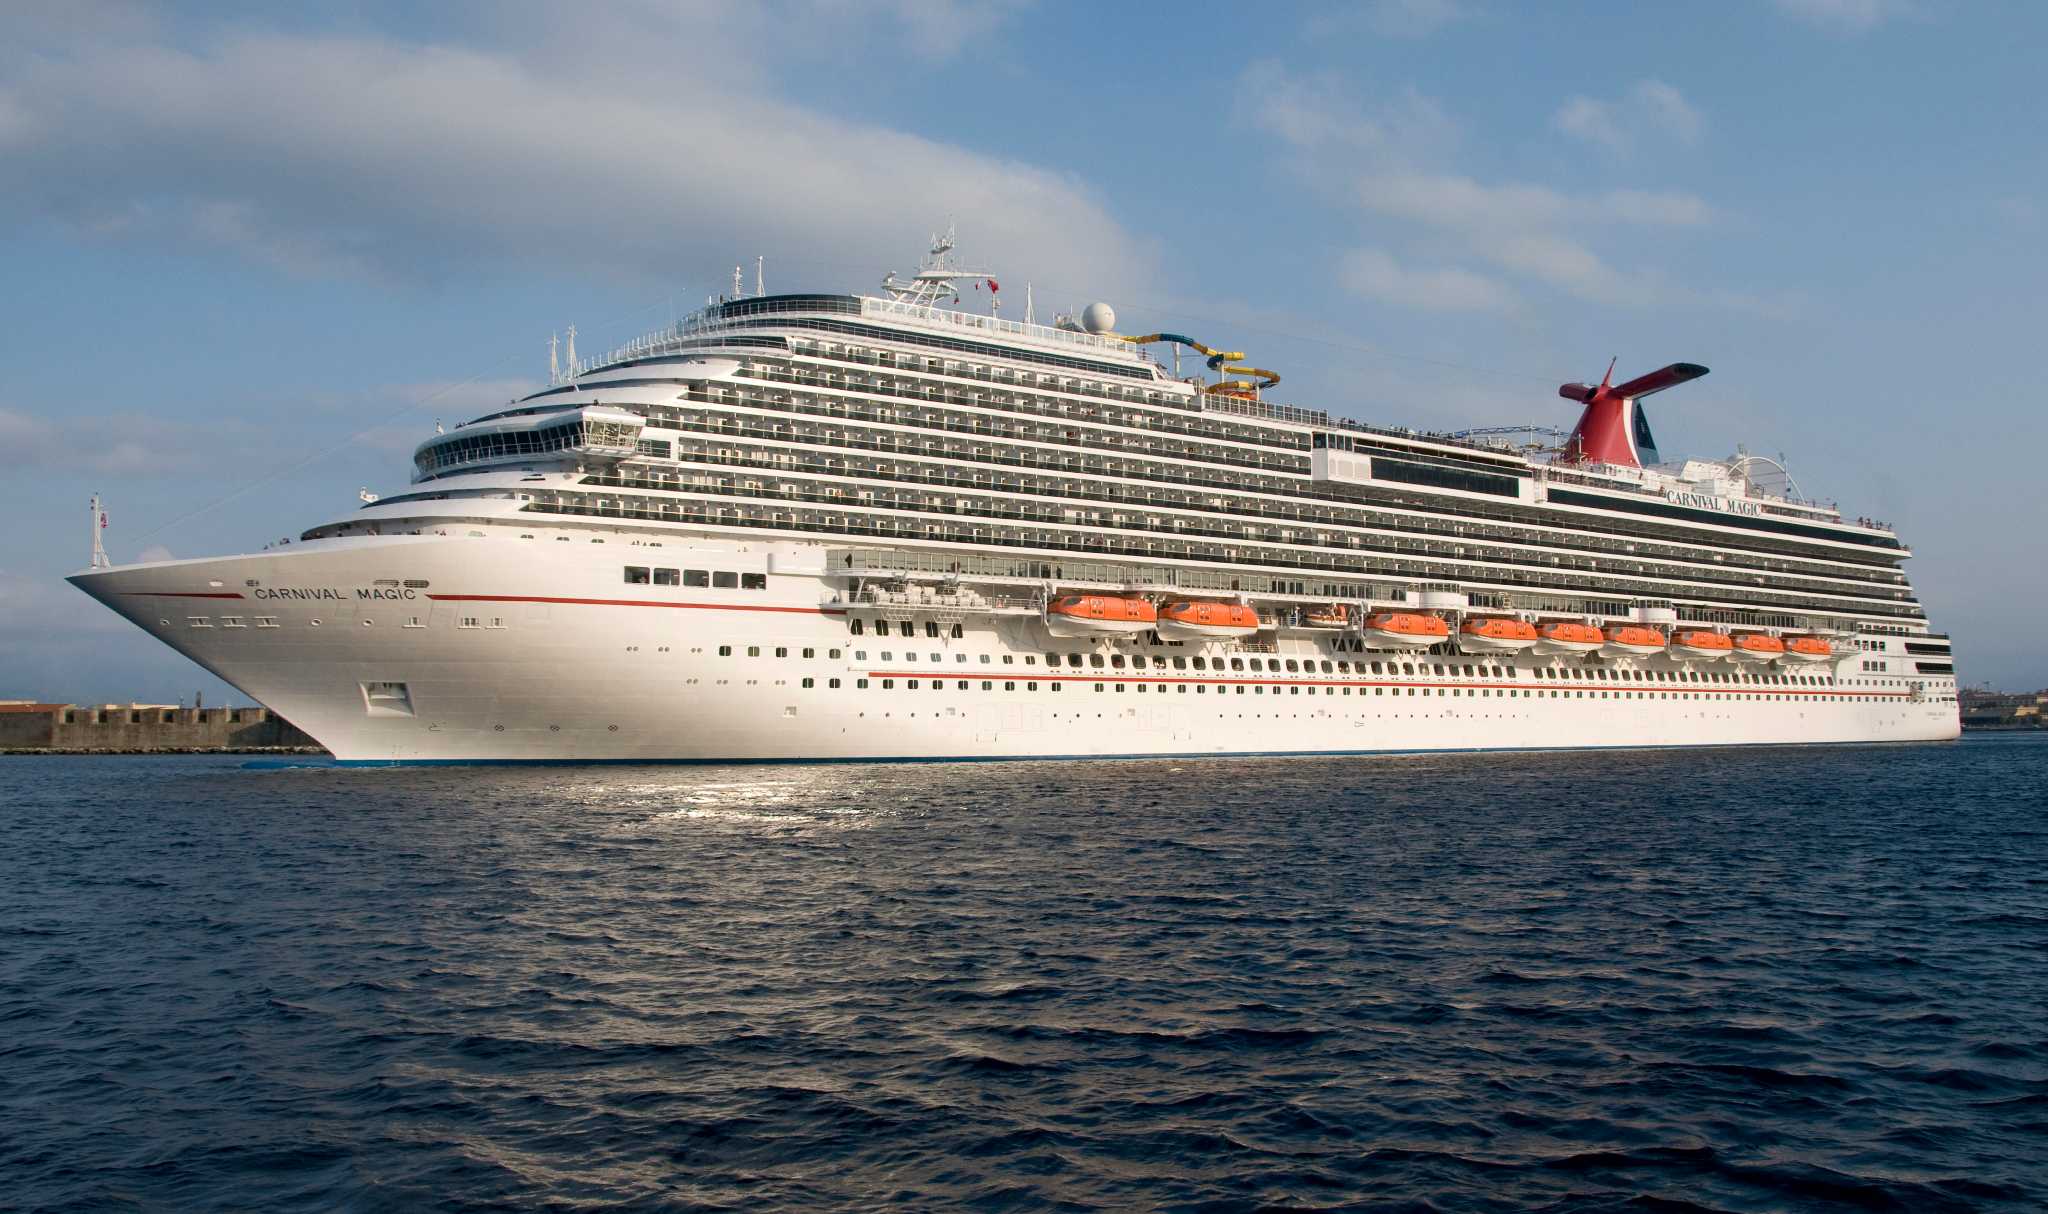 Man falls to his death on Carnival cruise out of Galveston